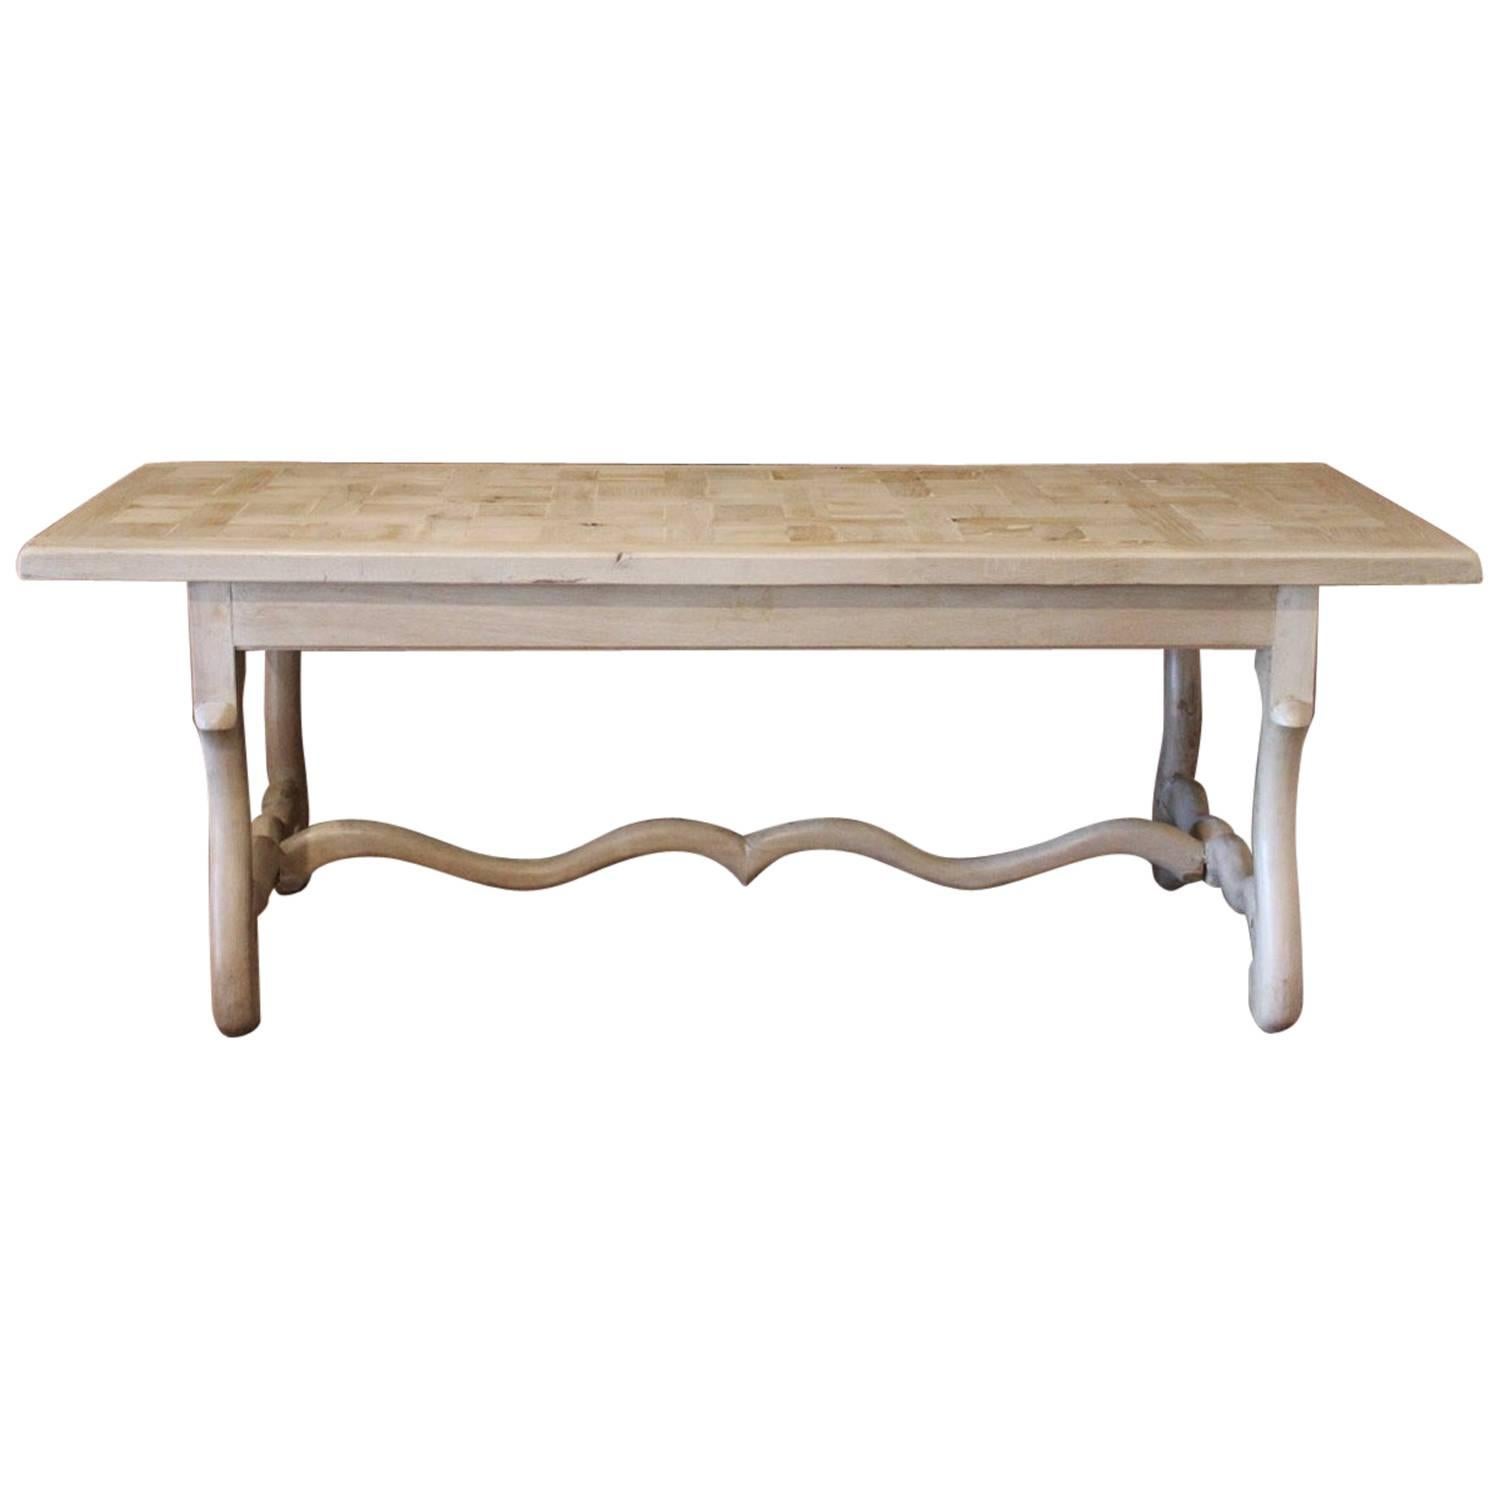 19th Century French Bleached Oak Dining Table